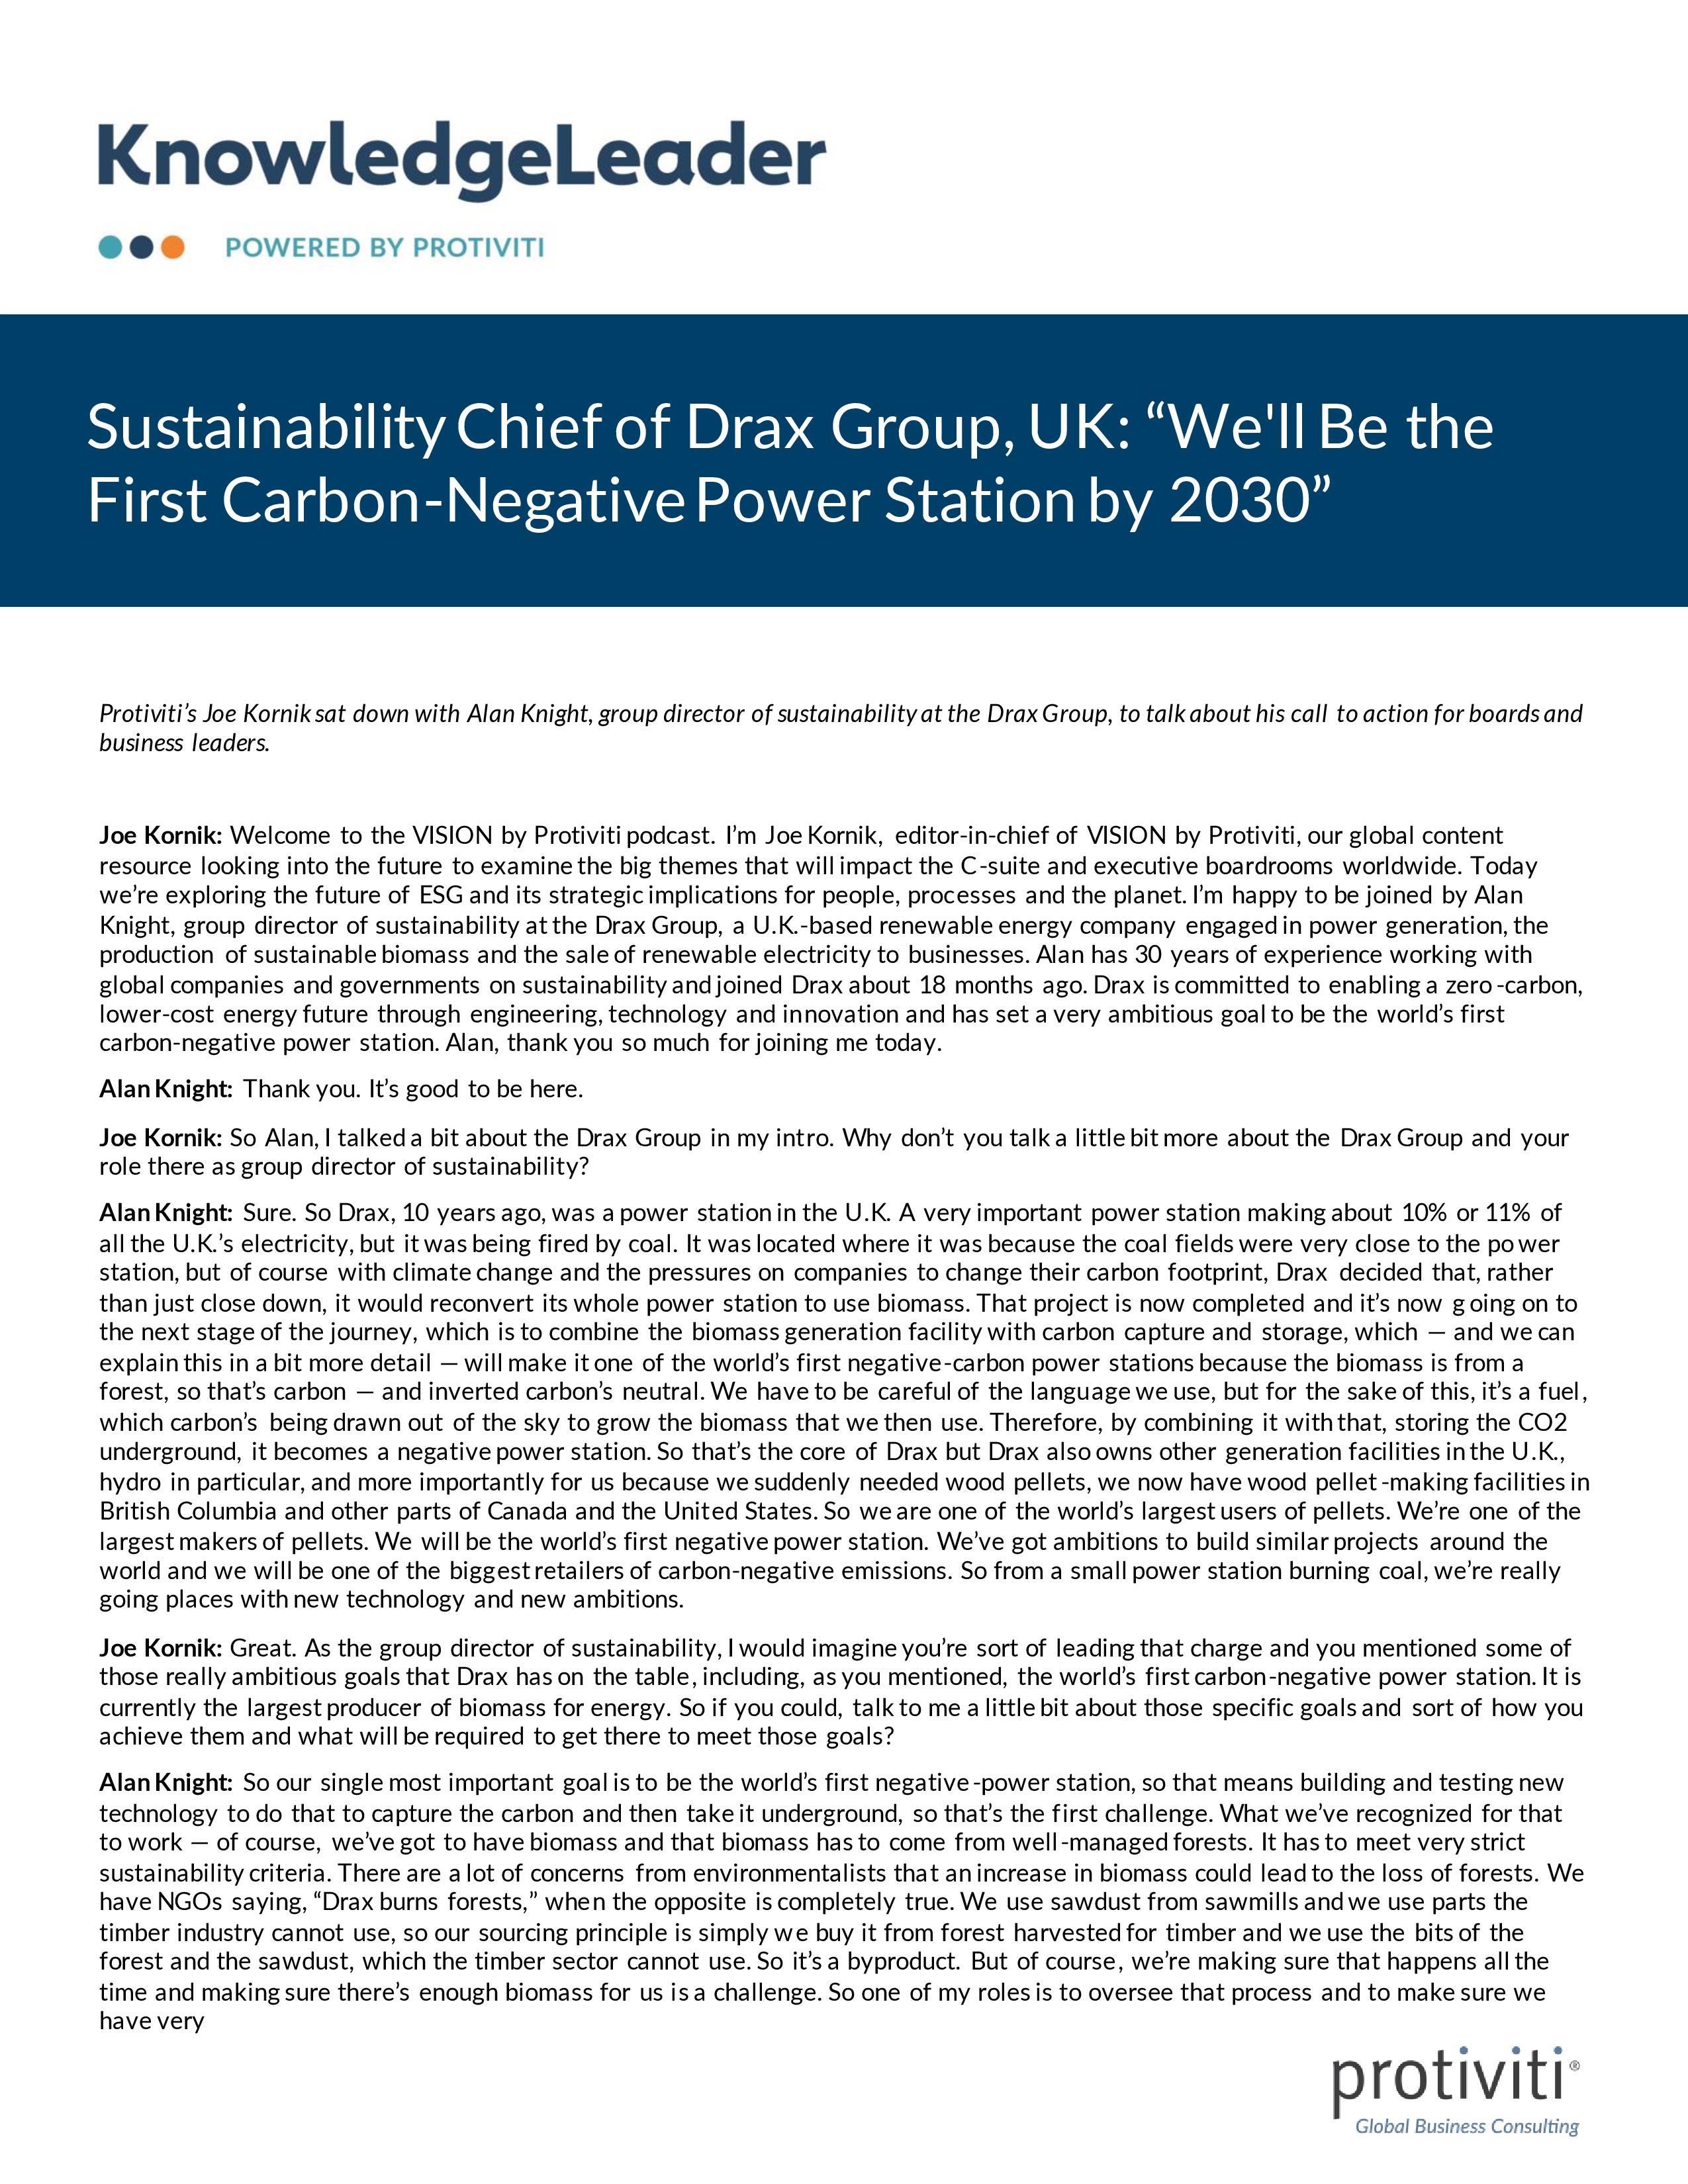 Screenshot of the first page of Sustainability Chief of Drax Group, UK “We ll Be the First Carbon-Negative Power Station by 2030”